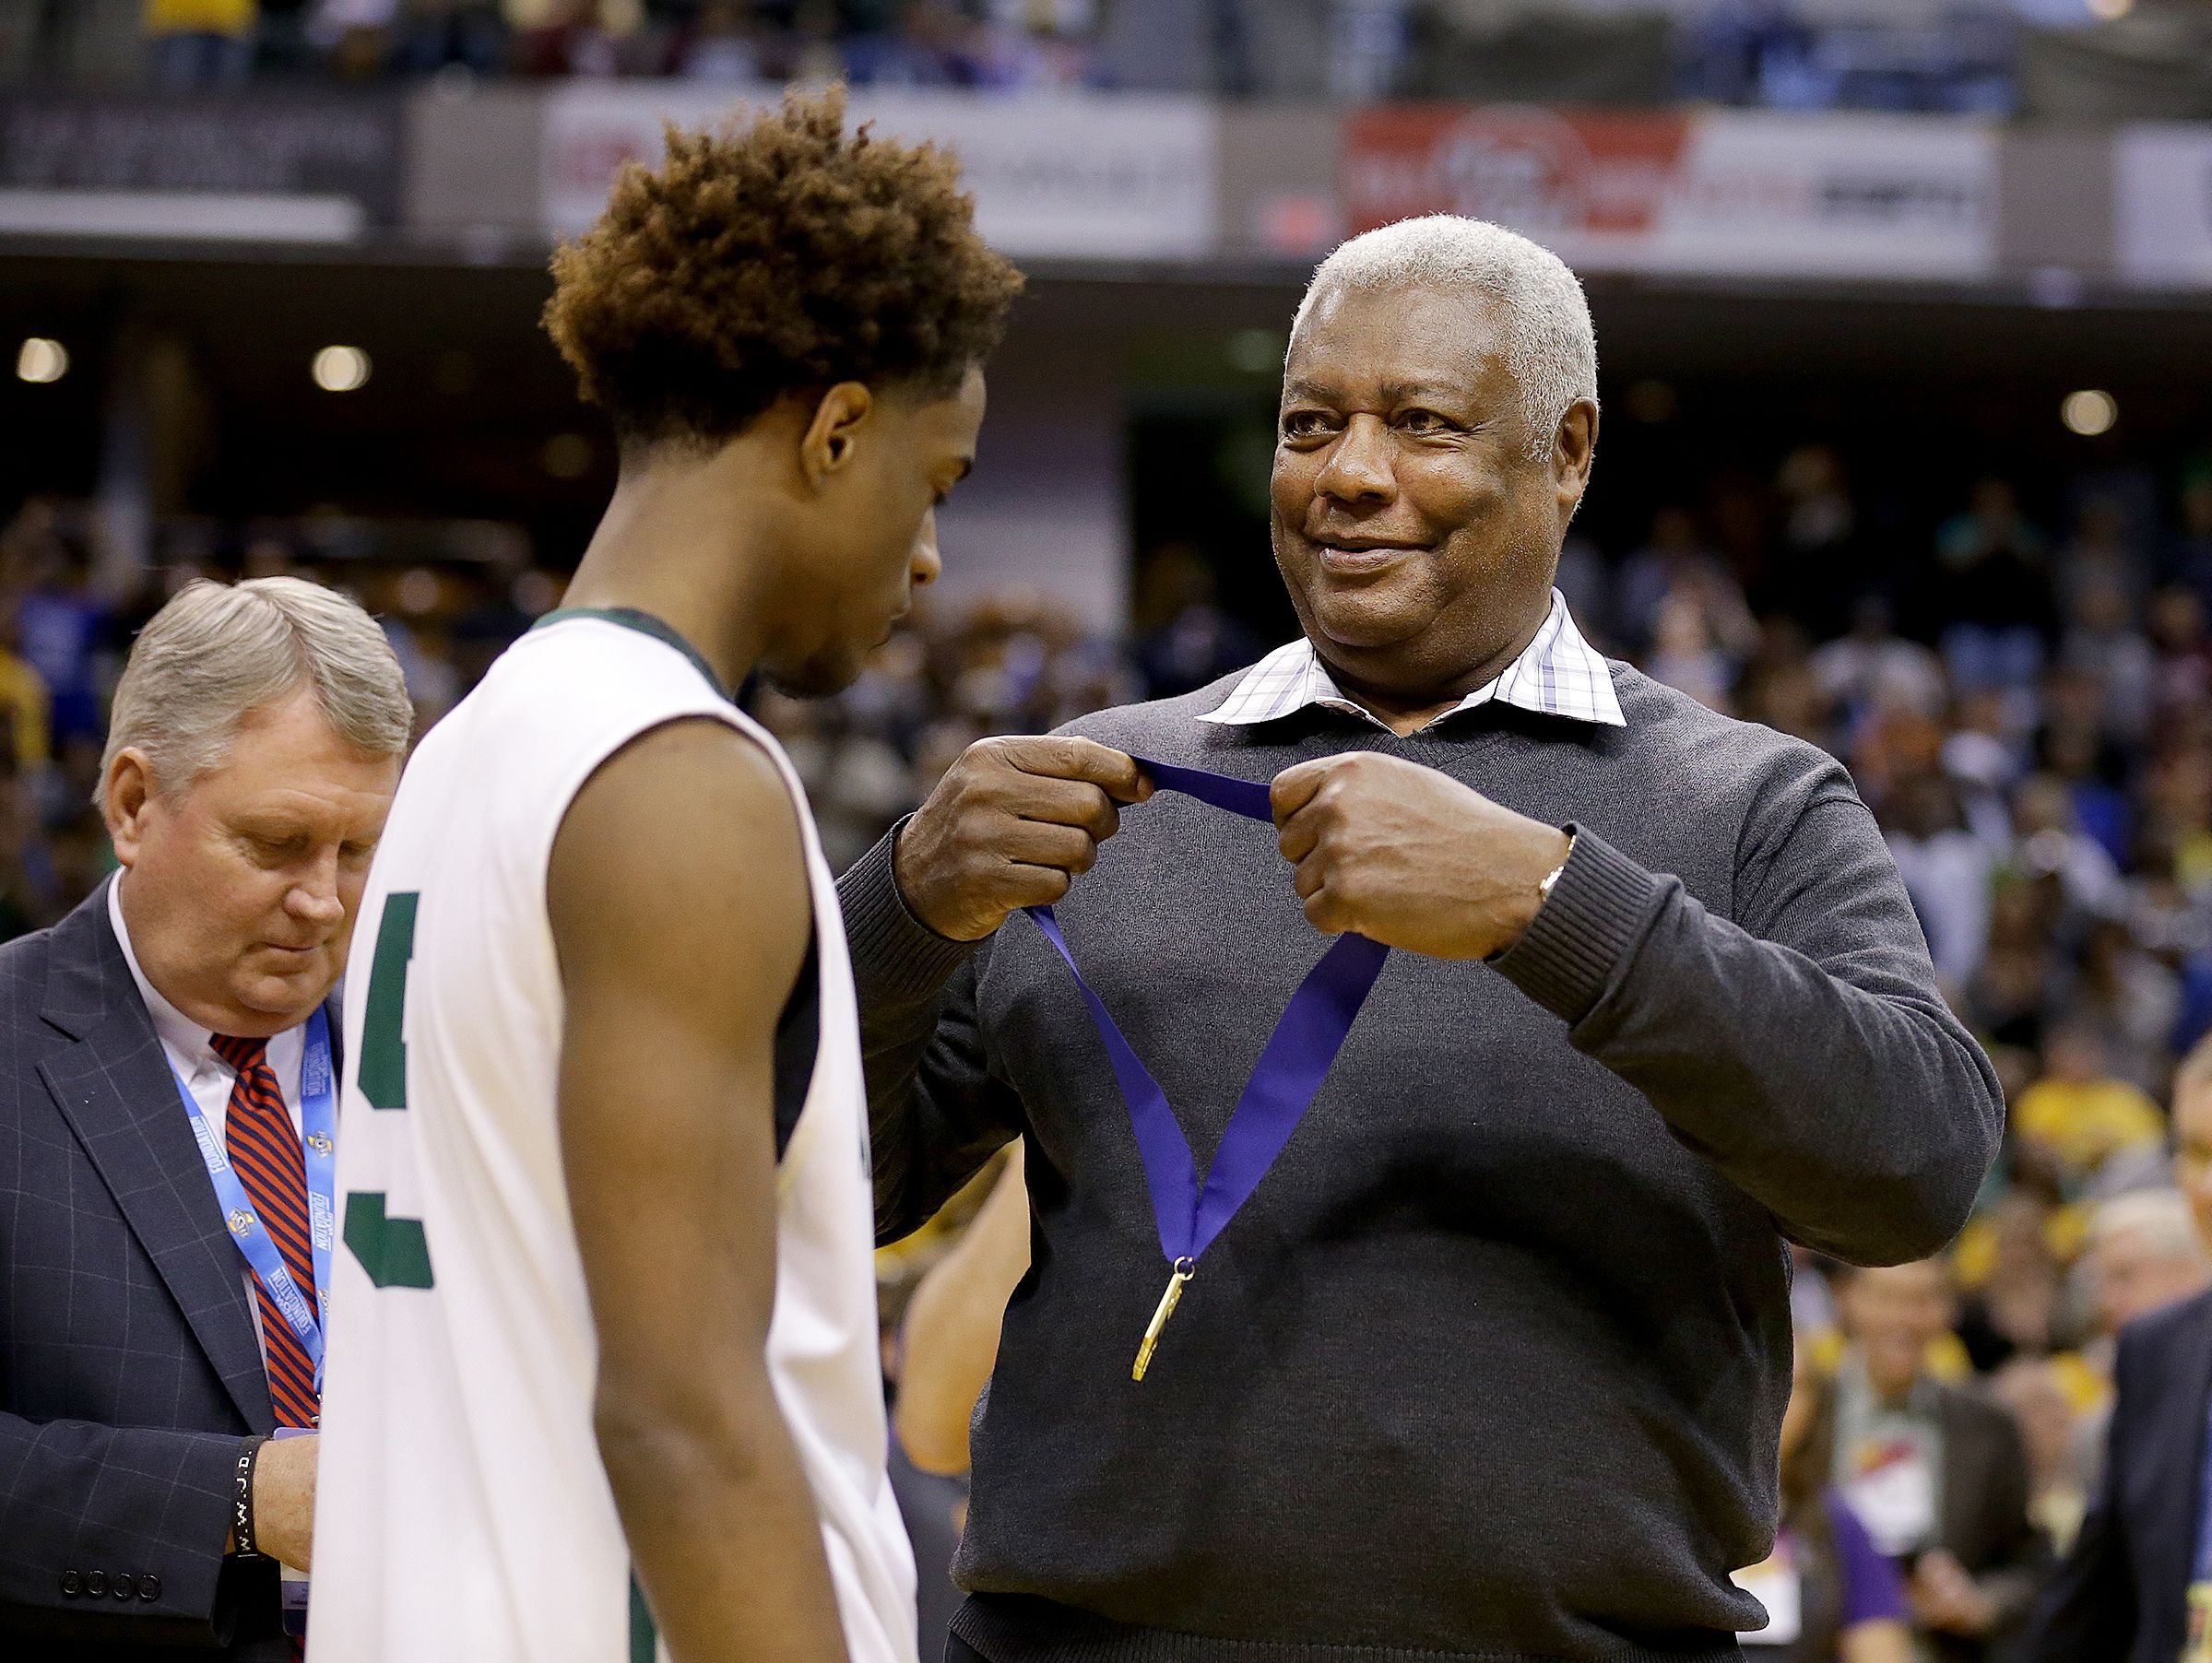 Oscar Robertson looks to put the winning medal around Crispus Attucks Tigers Jamal Harris (5) after winning the IHSAA 3A Boys Basketball State Finals game Saturday, March 25, 2017, evening at Bankers Life Fieldhouse. The Crispus Attucks Tigers defeated the Twin Lakes Indians 73-71.